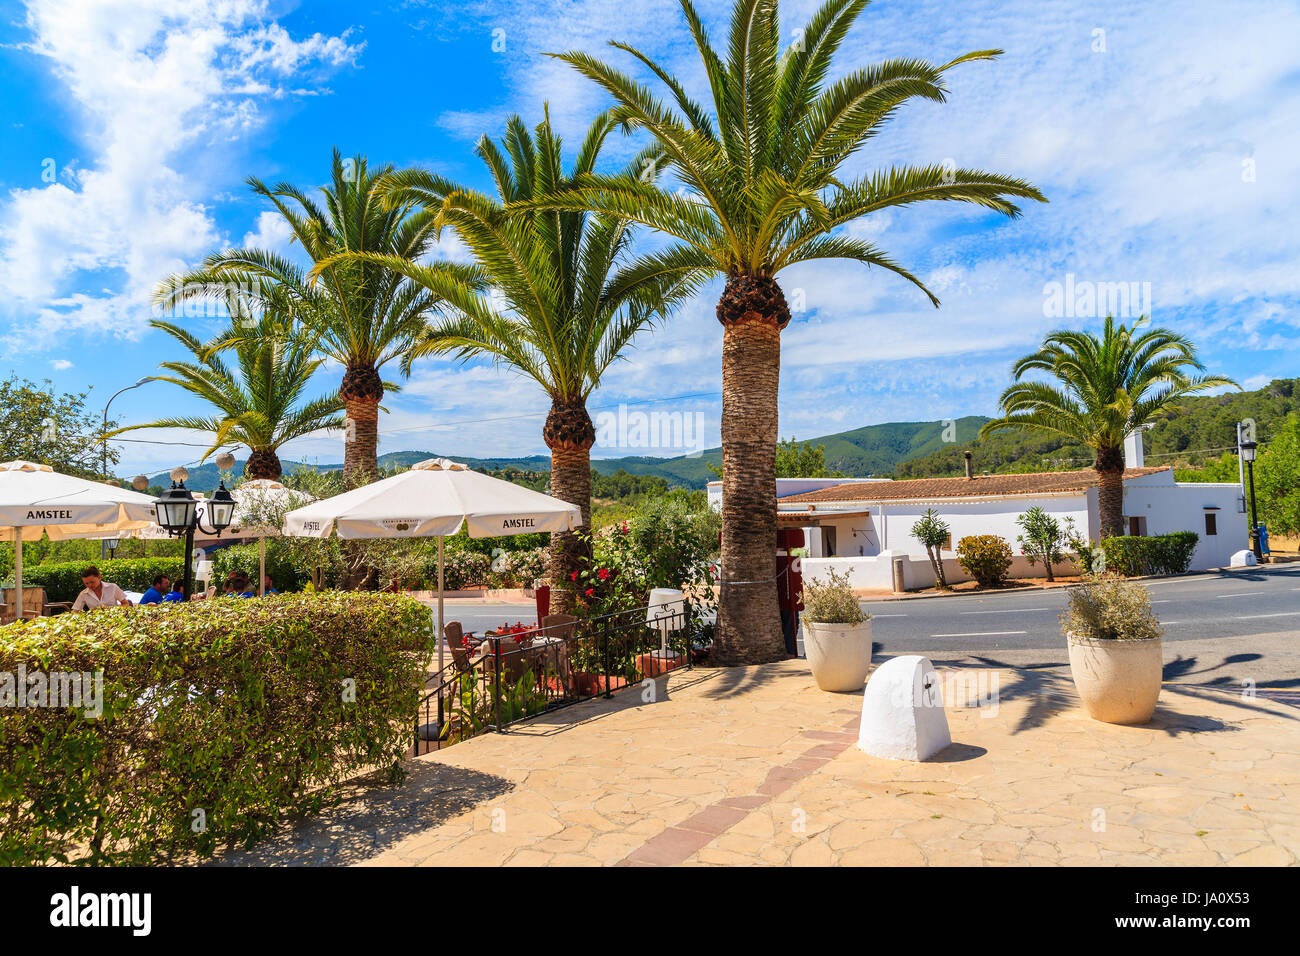 IBIZA ISLAND, SPAIN - MAY 18, 2017: garden of traditional restaurant building and palm trees in Sant Carles de Peralta village, Ibiza island, Spain. Stock Photo